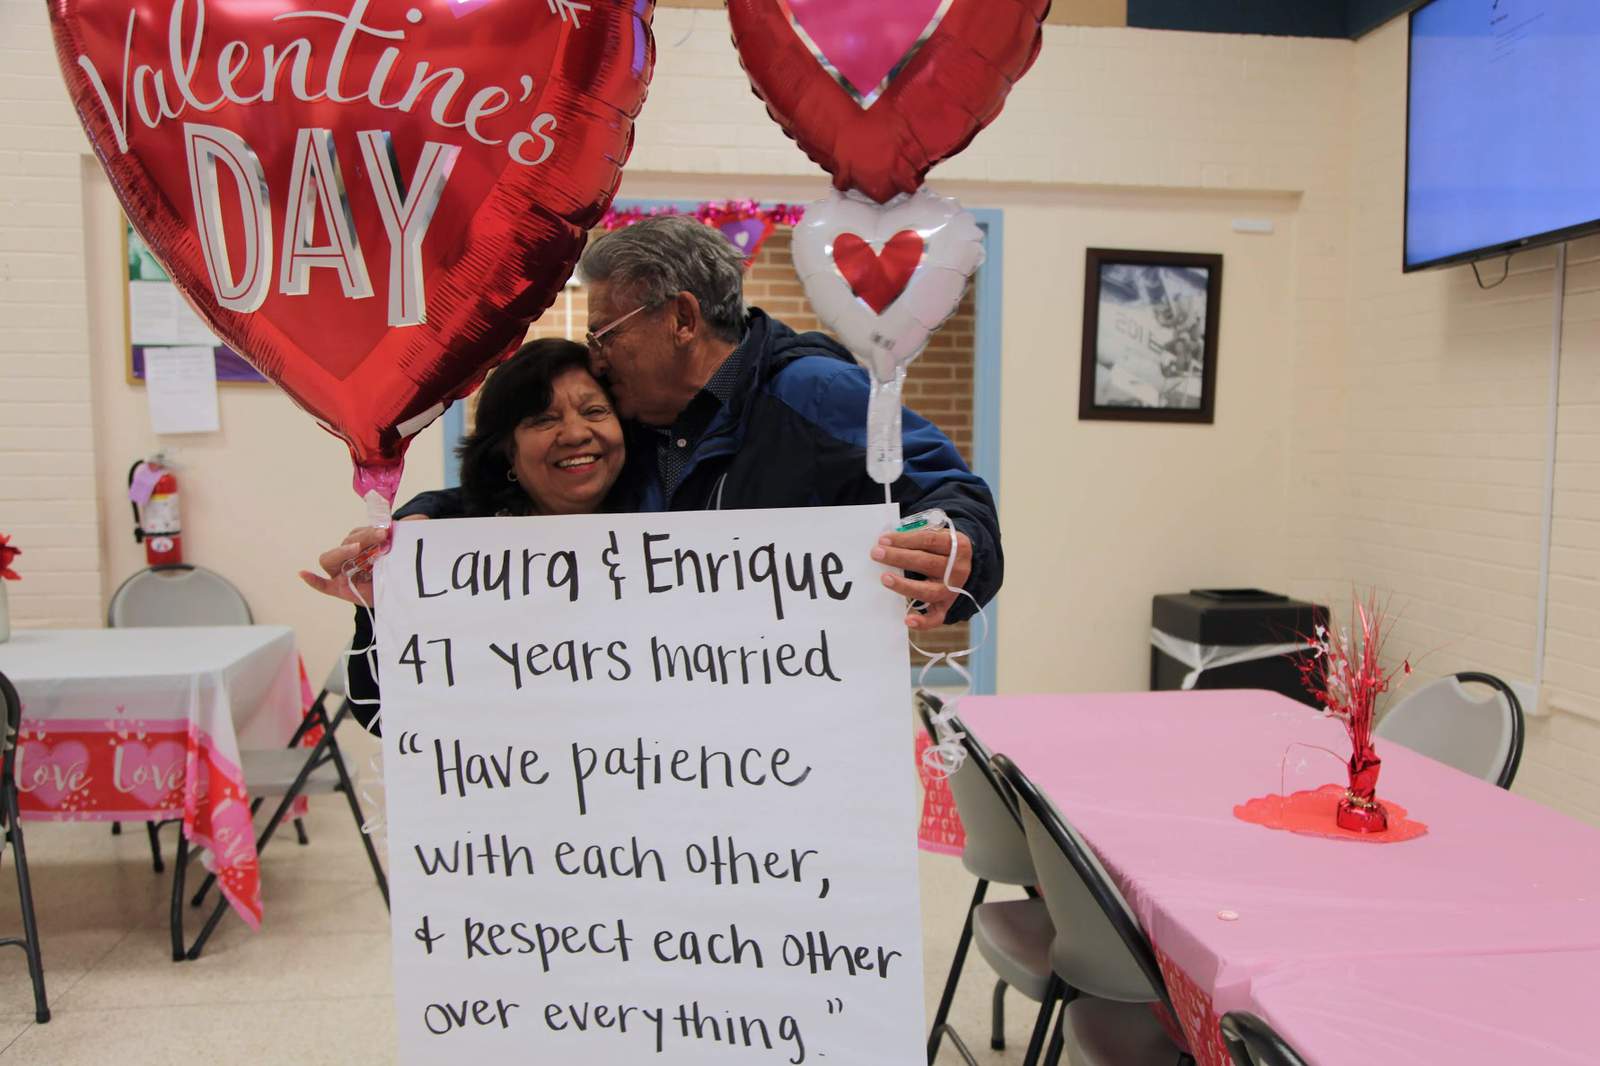 Words from the wise: San Antonio seniors offer tips on lasting love